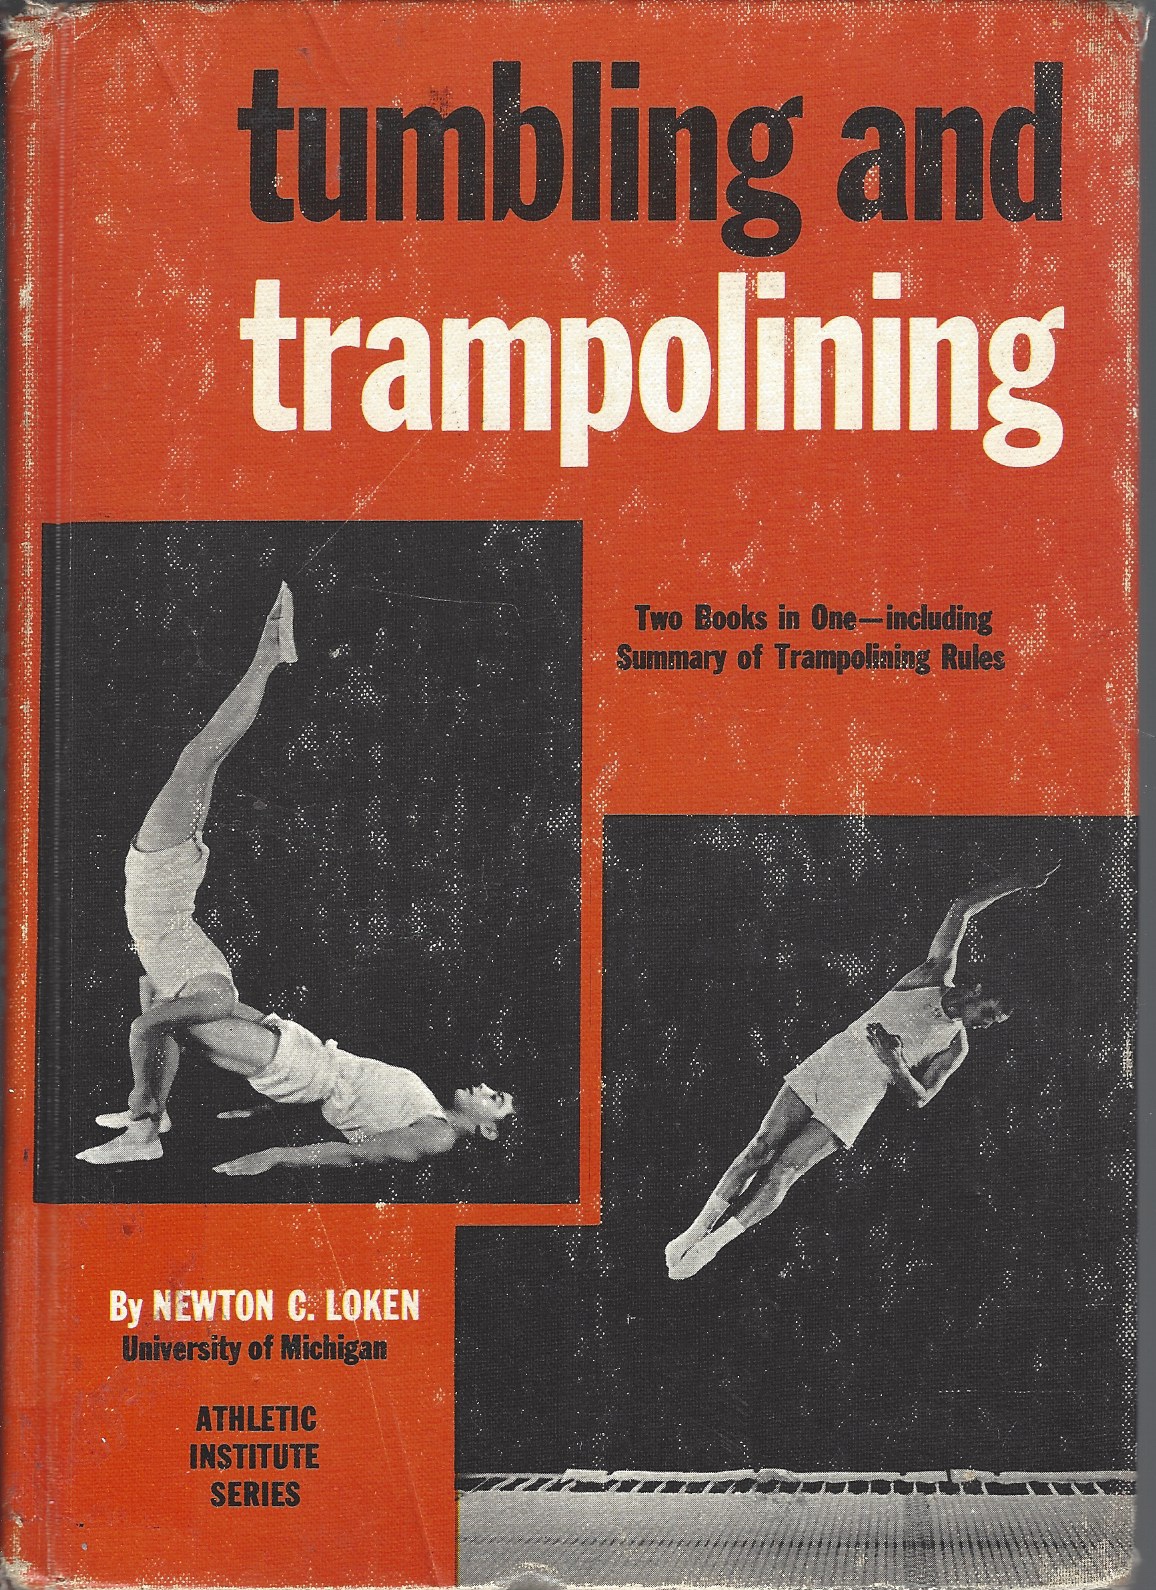 LOKEN NEWTON C. - Tumbling and Trampolining: Two Books in One Including Summary of Trampolining Rules